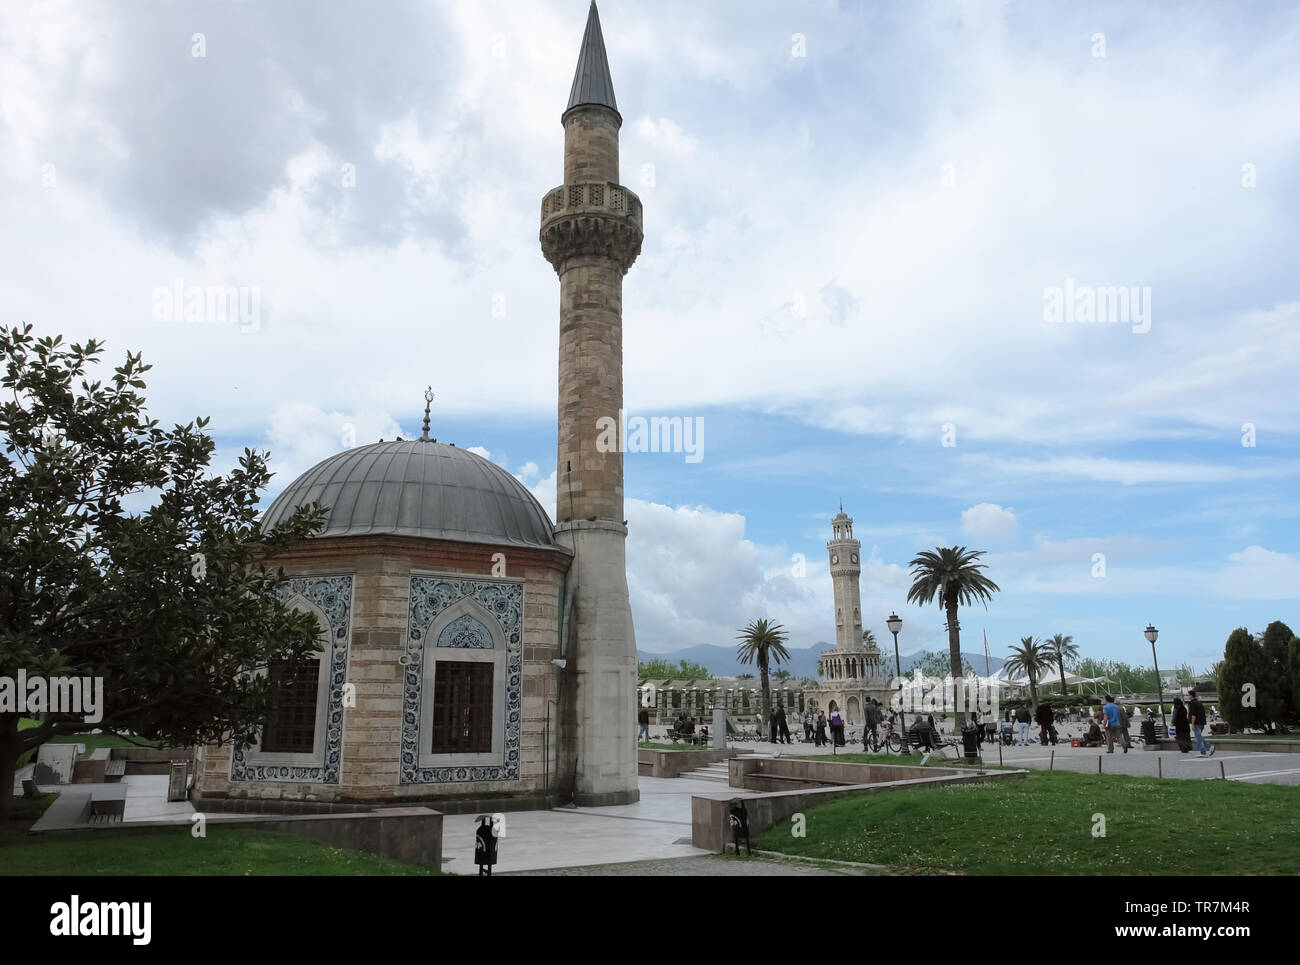 Izmir, Turkey - April 19, 2012: Old mosque and Clock Tower on the central Konak square in Izmir, Turkey. Stock Photo